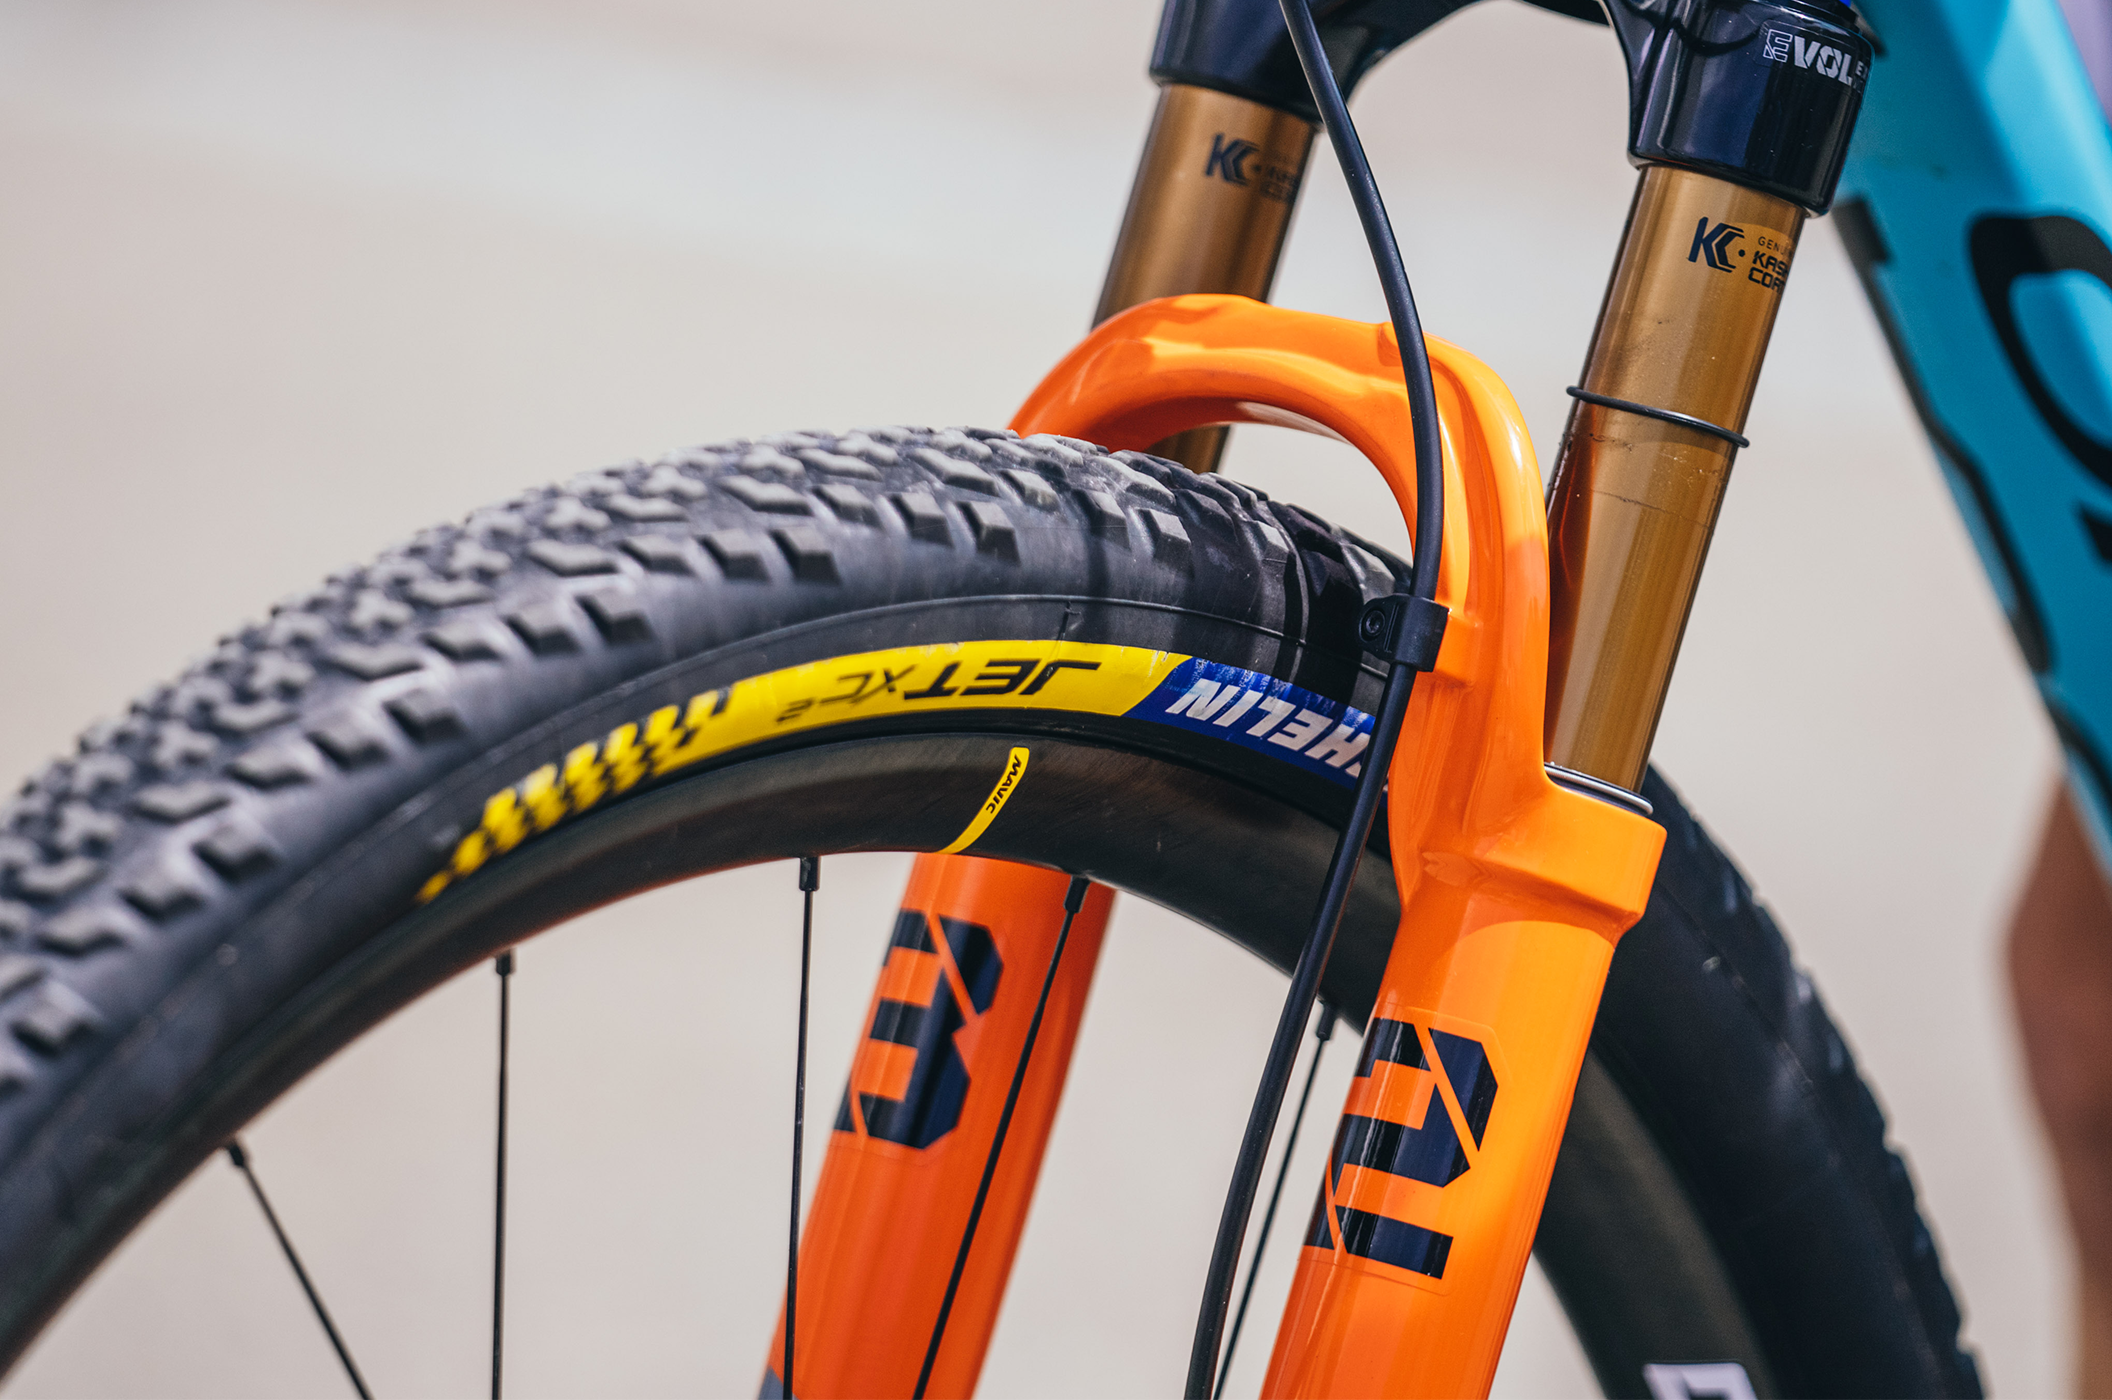 Michelin - The Right Tire & Inner Tube for Every Adventure